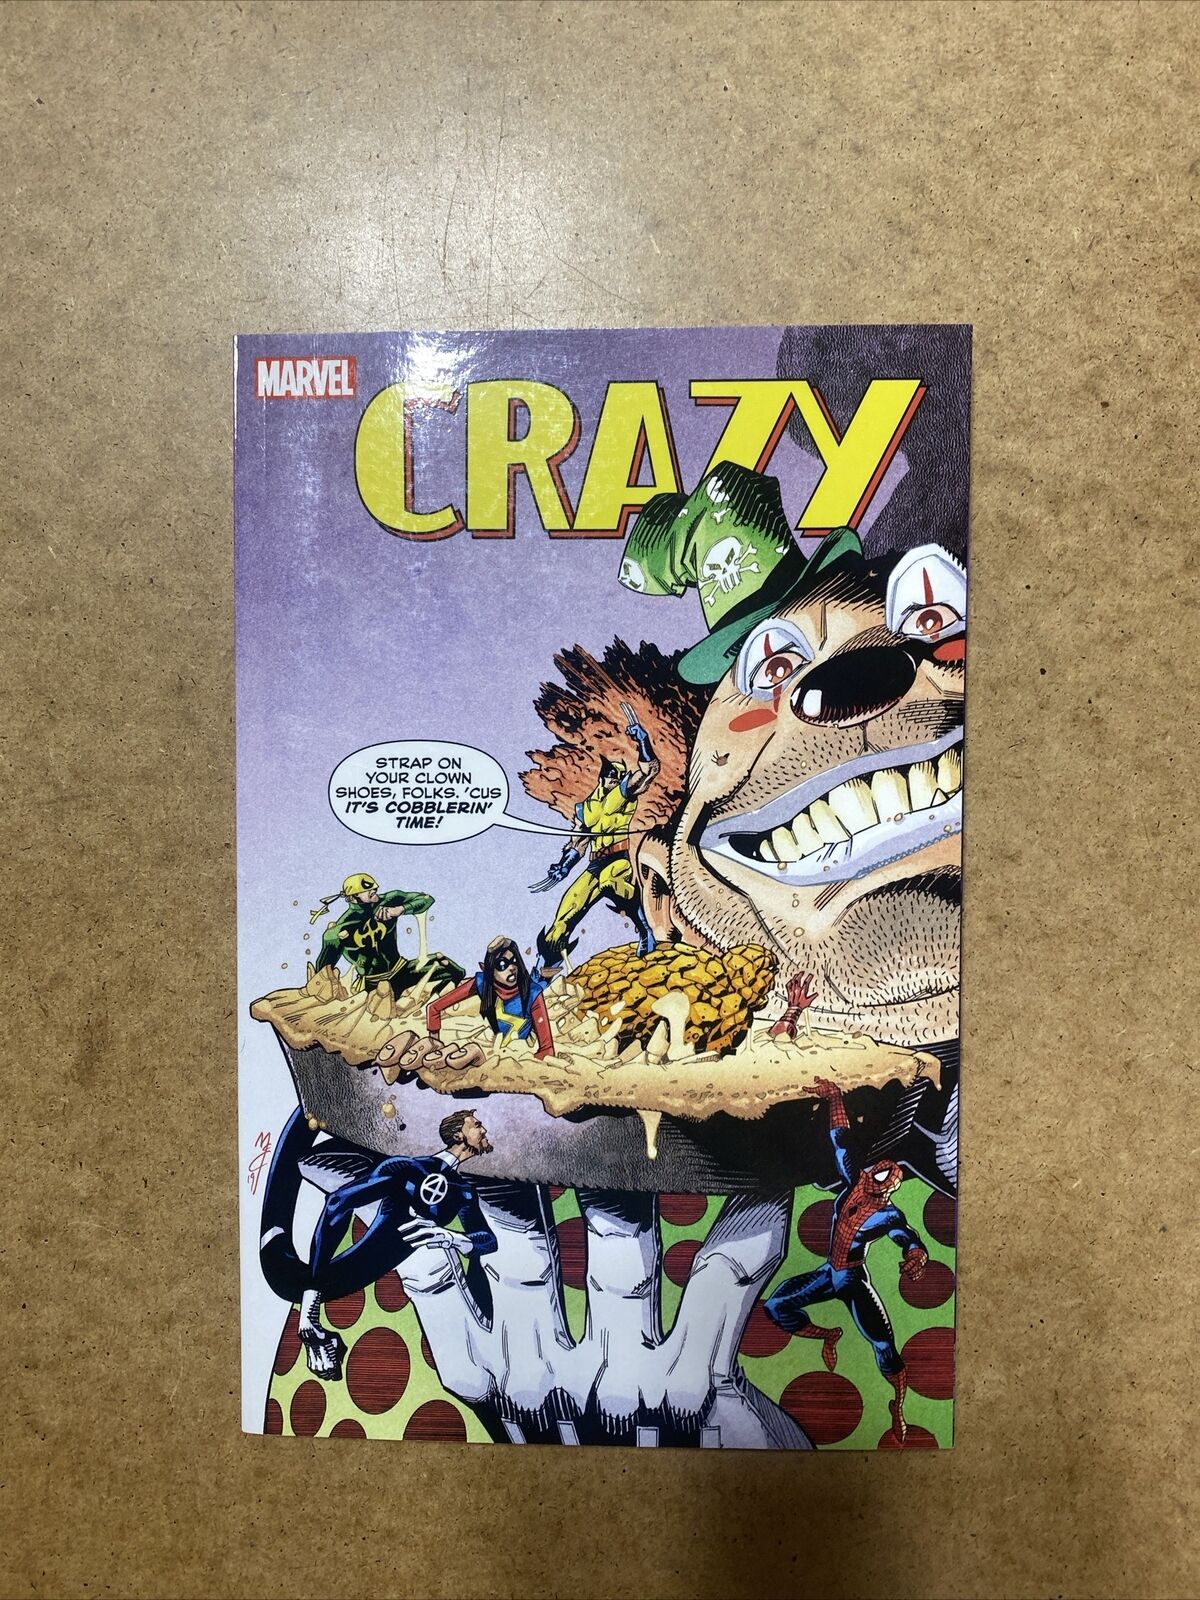 CRAZY GRAPHIC NOVEL (248 Pages) New Paperback Collects Crazy Magazine Highlights